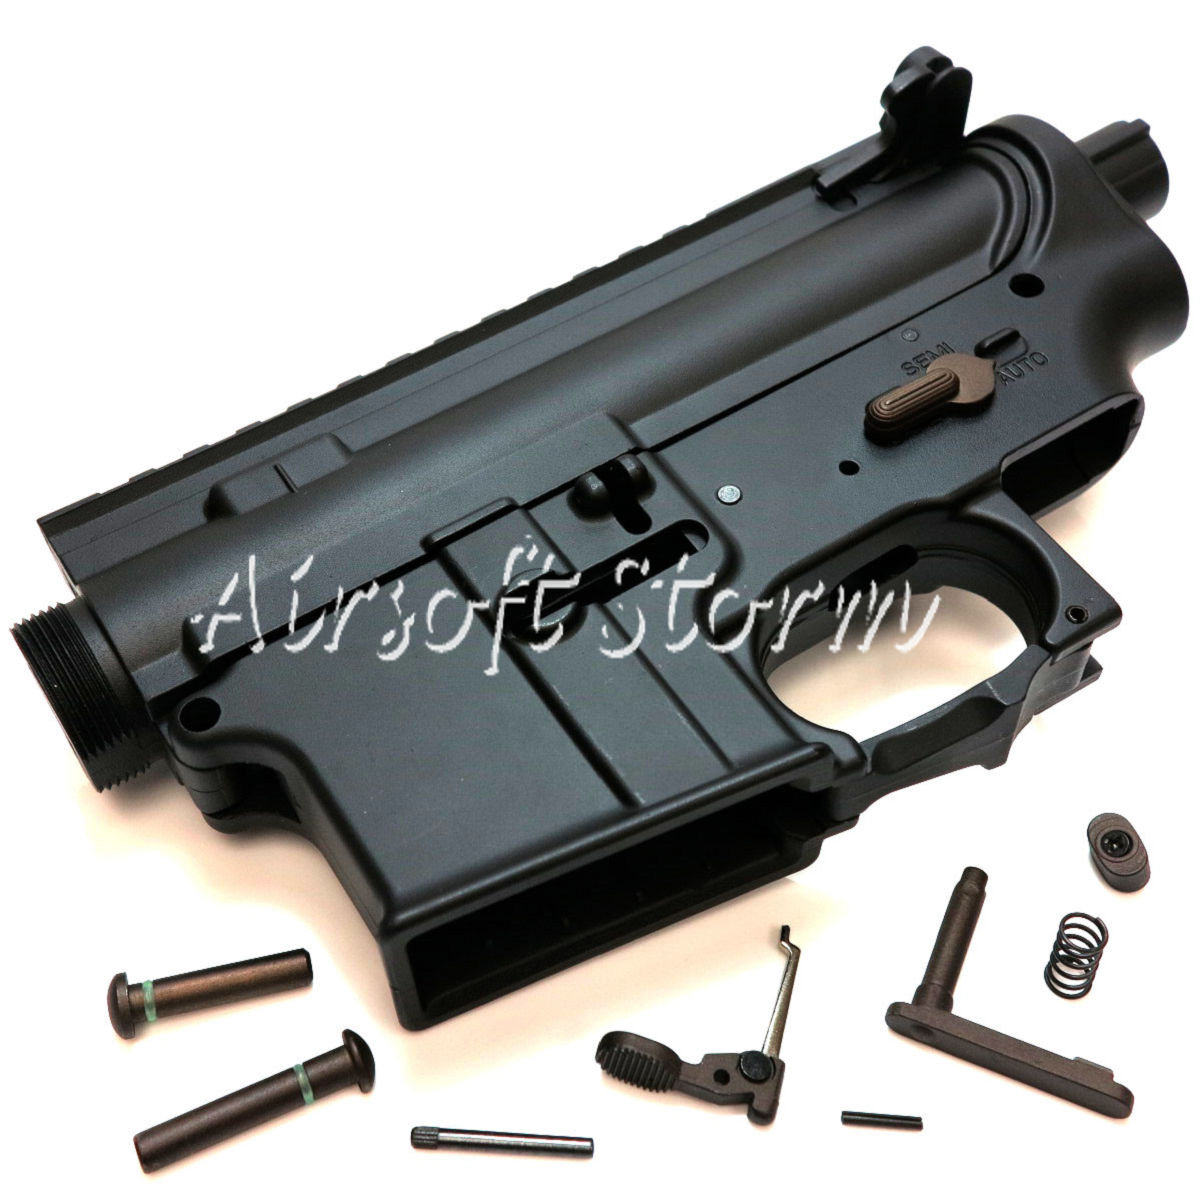 AEG Gear APS Upper & Lower Metal Body Receiver for M4/M16 AEG Black - Click Image to Close